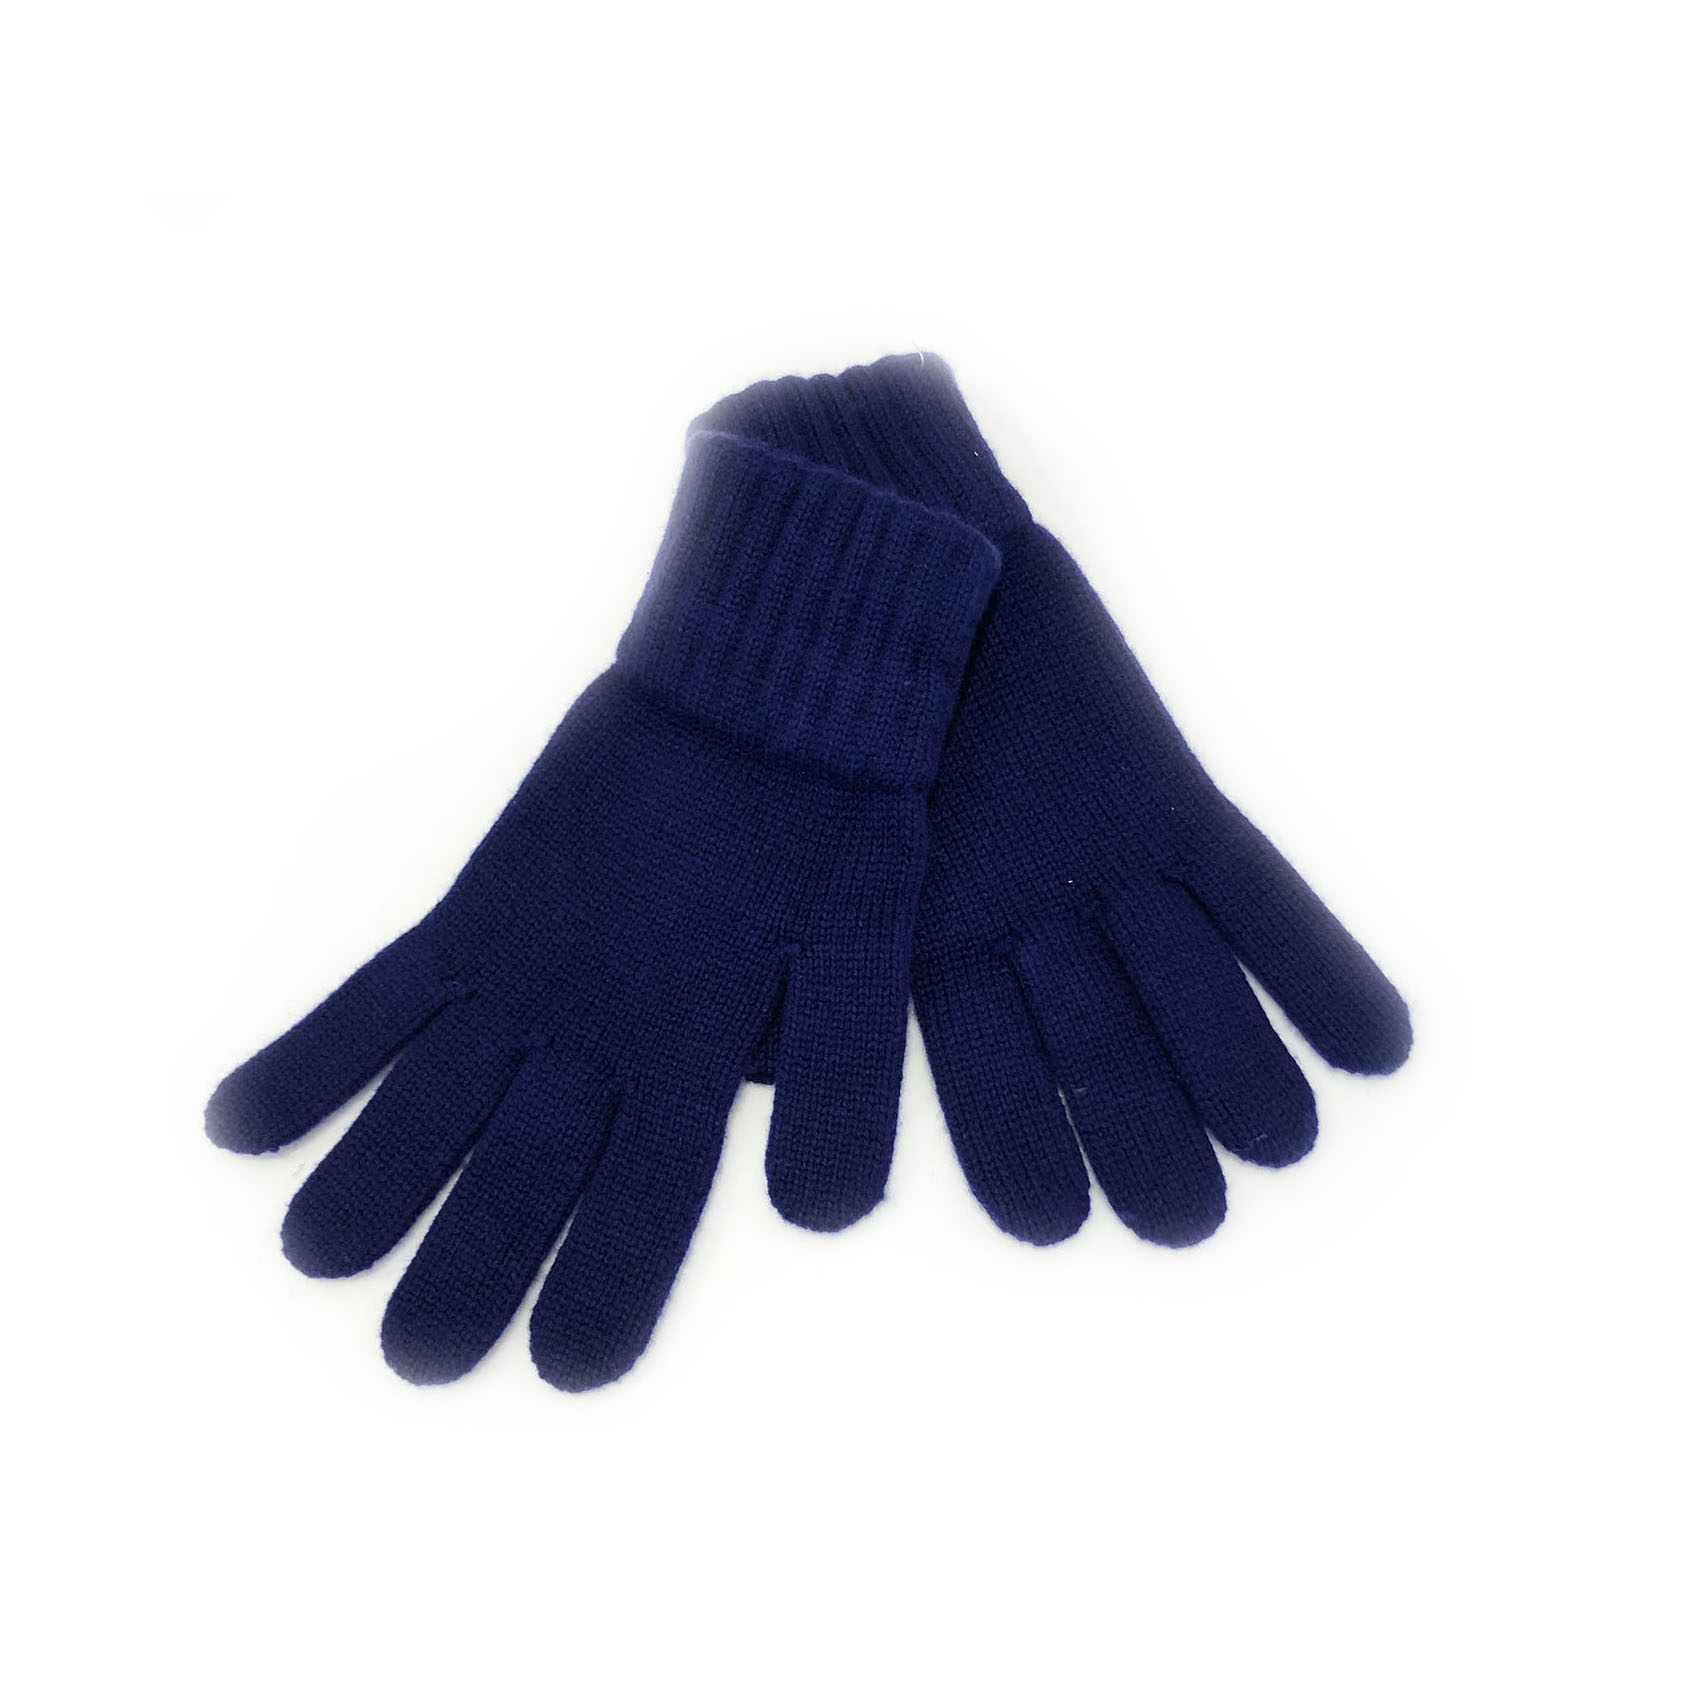 An image of Ladies 100% Cashmere Gloves - Constellation Navy